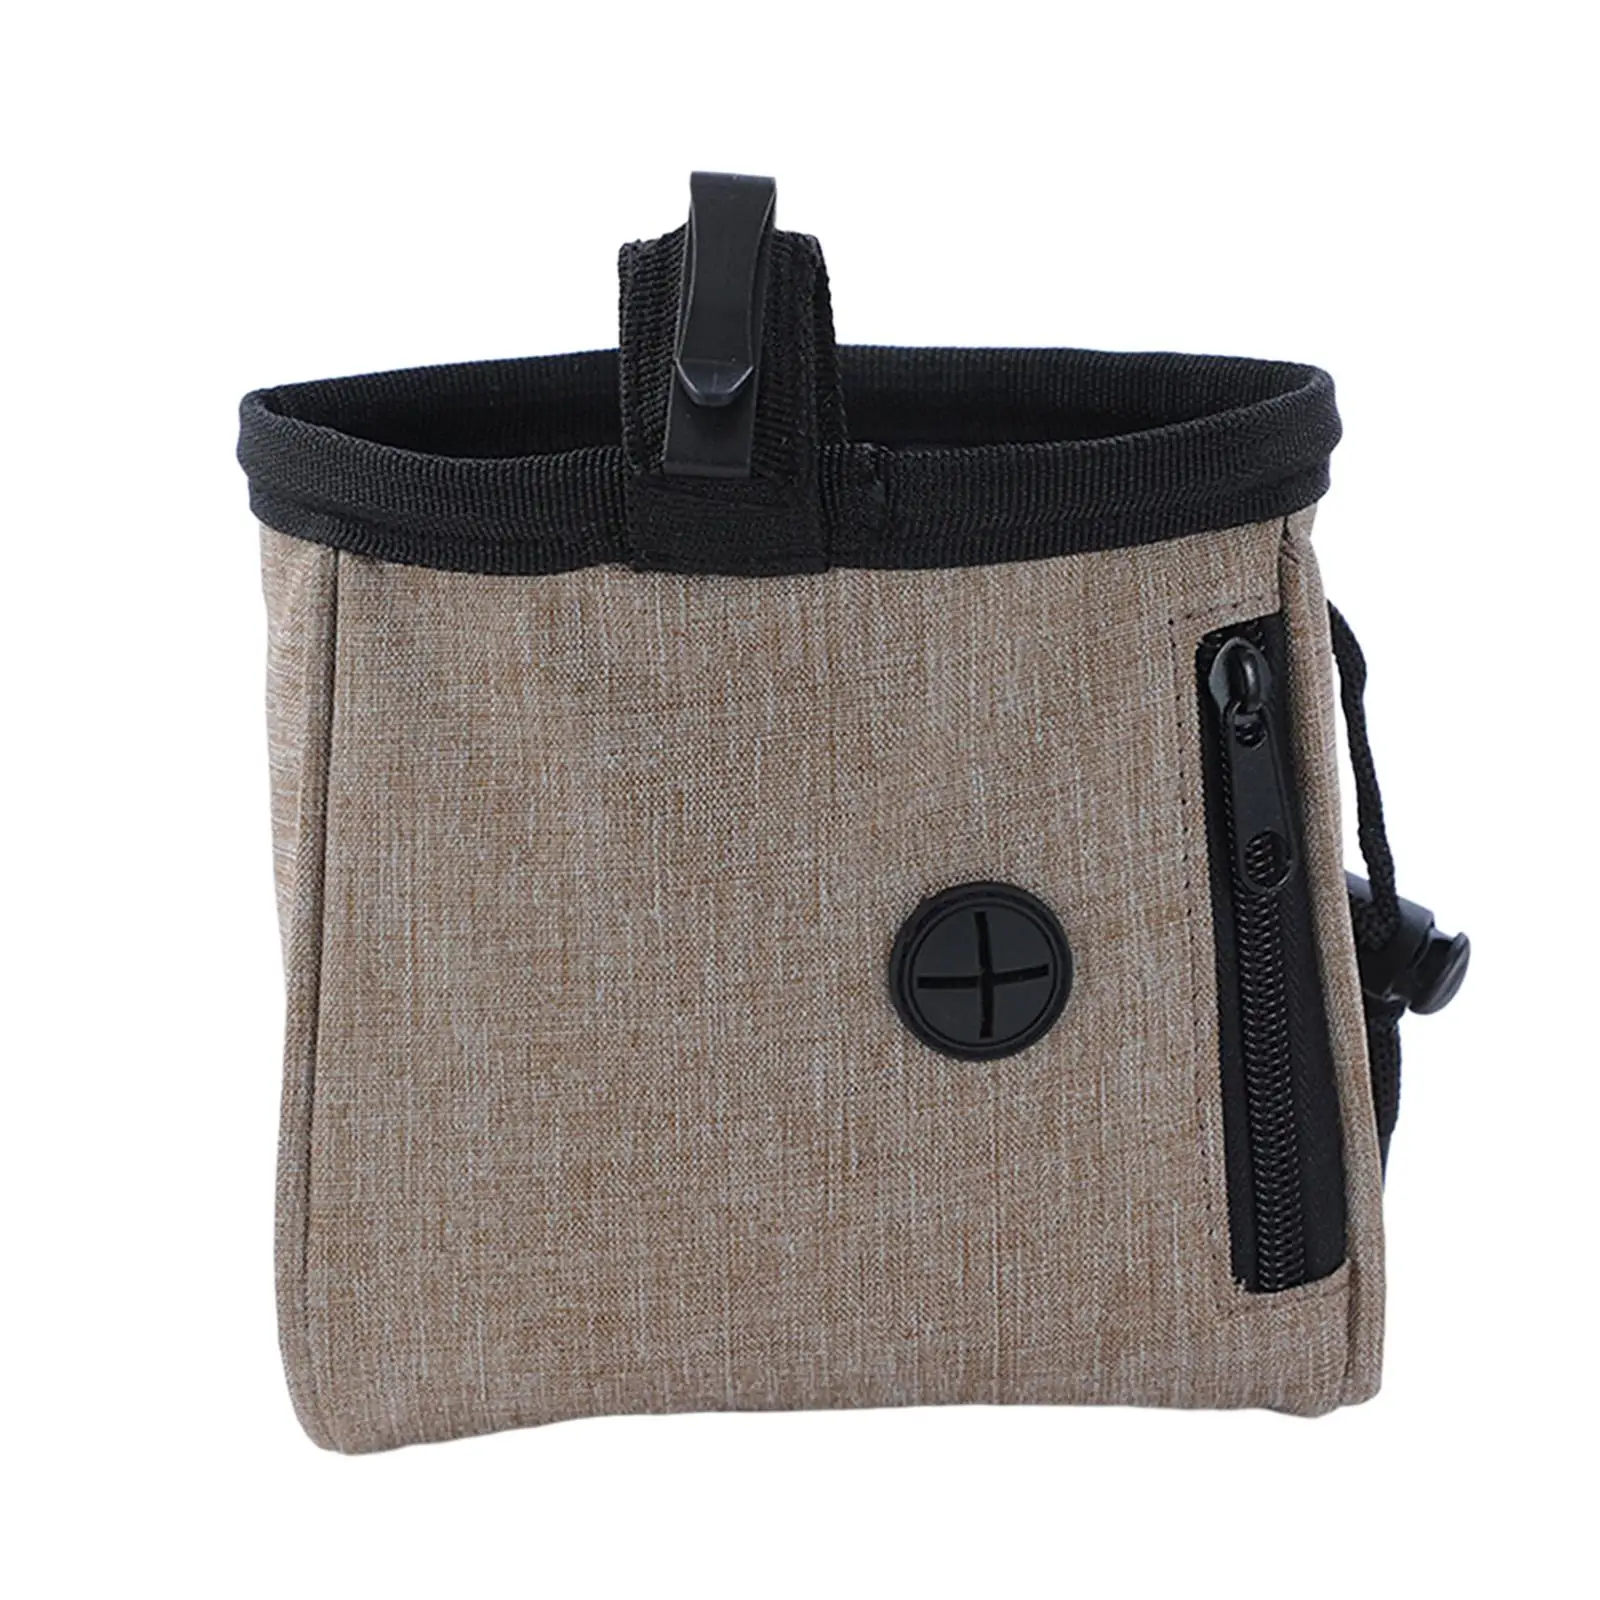 Pet Dogs Treat Pouch Multipurpose with Clip Waist Belt Snack Storage Carrier Holder for Jogging Daily Travel Outdoor Hiking